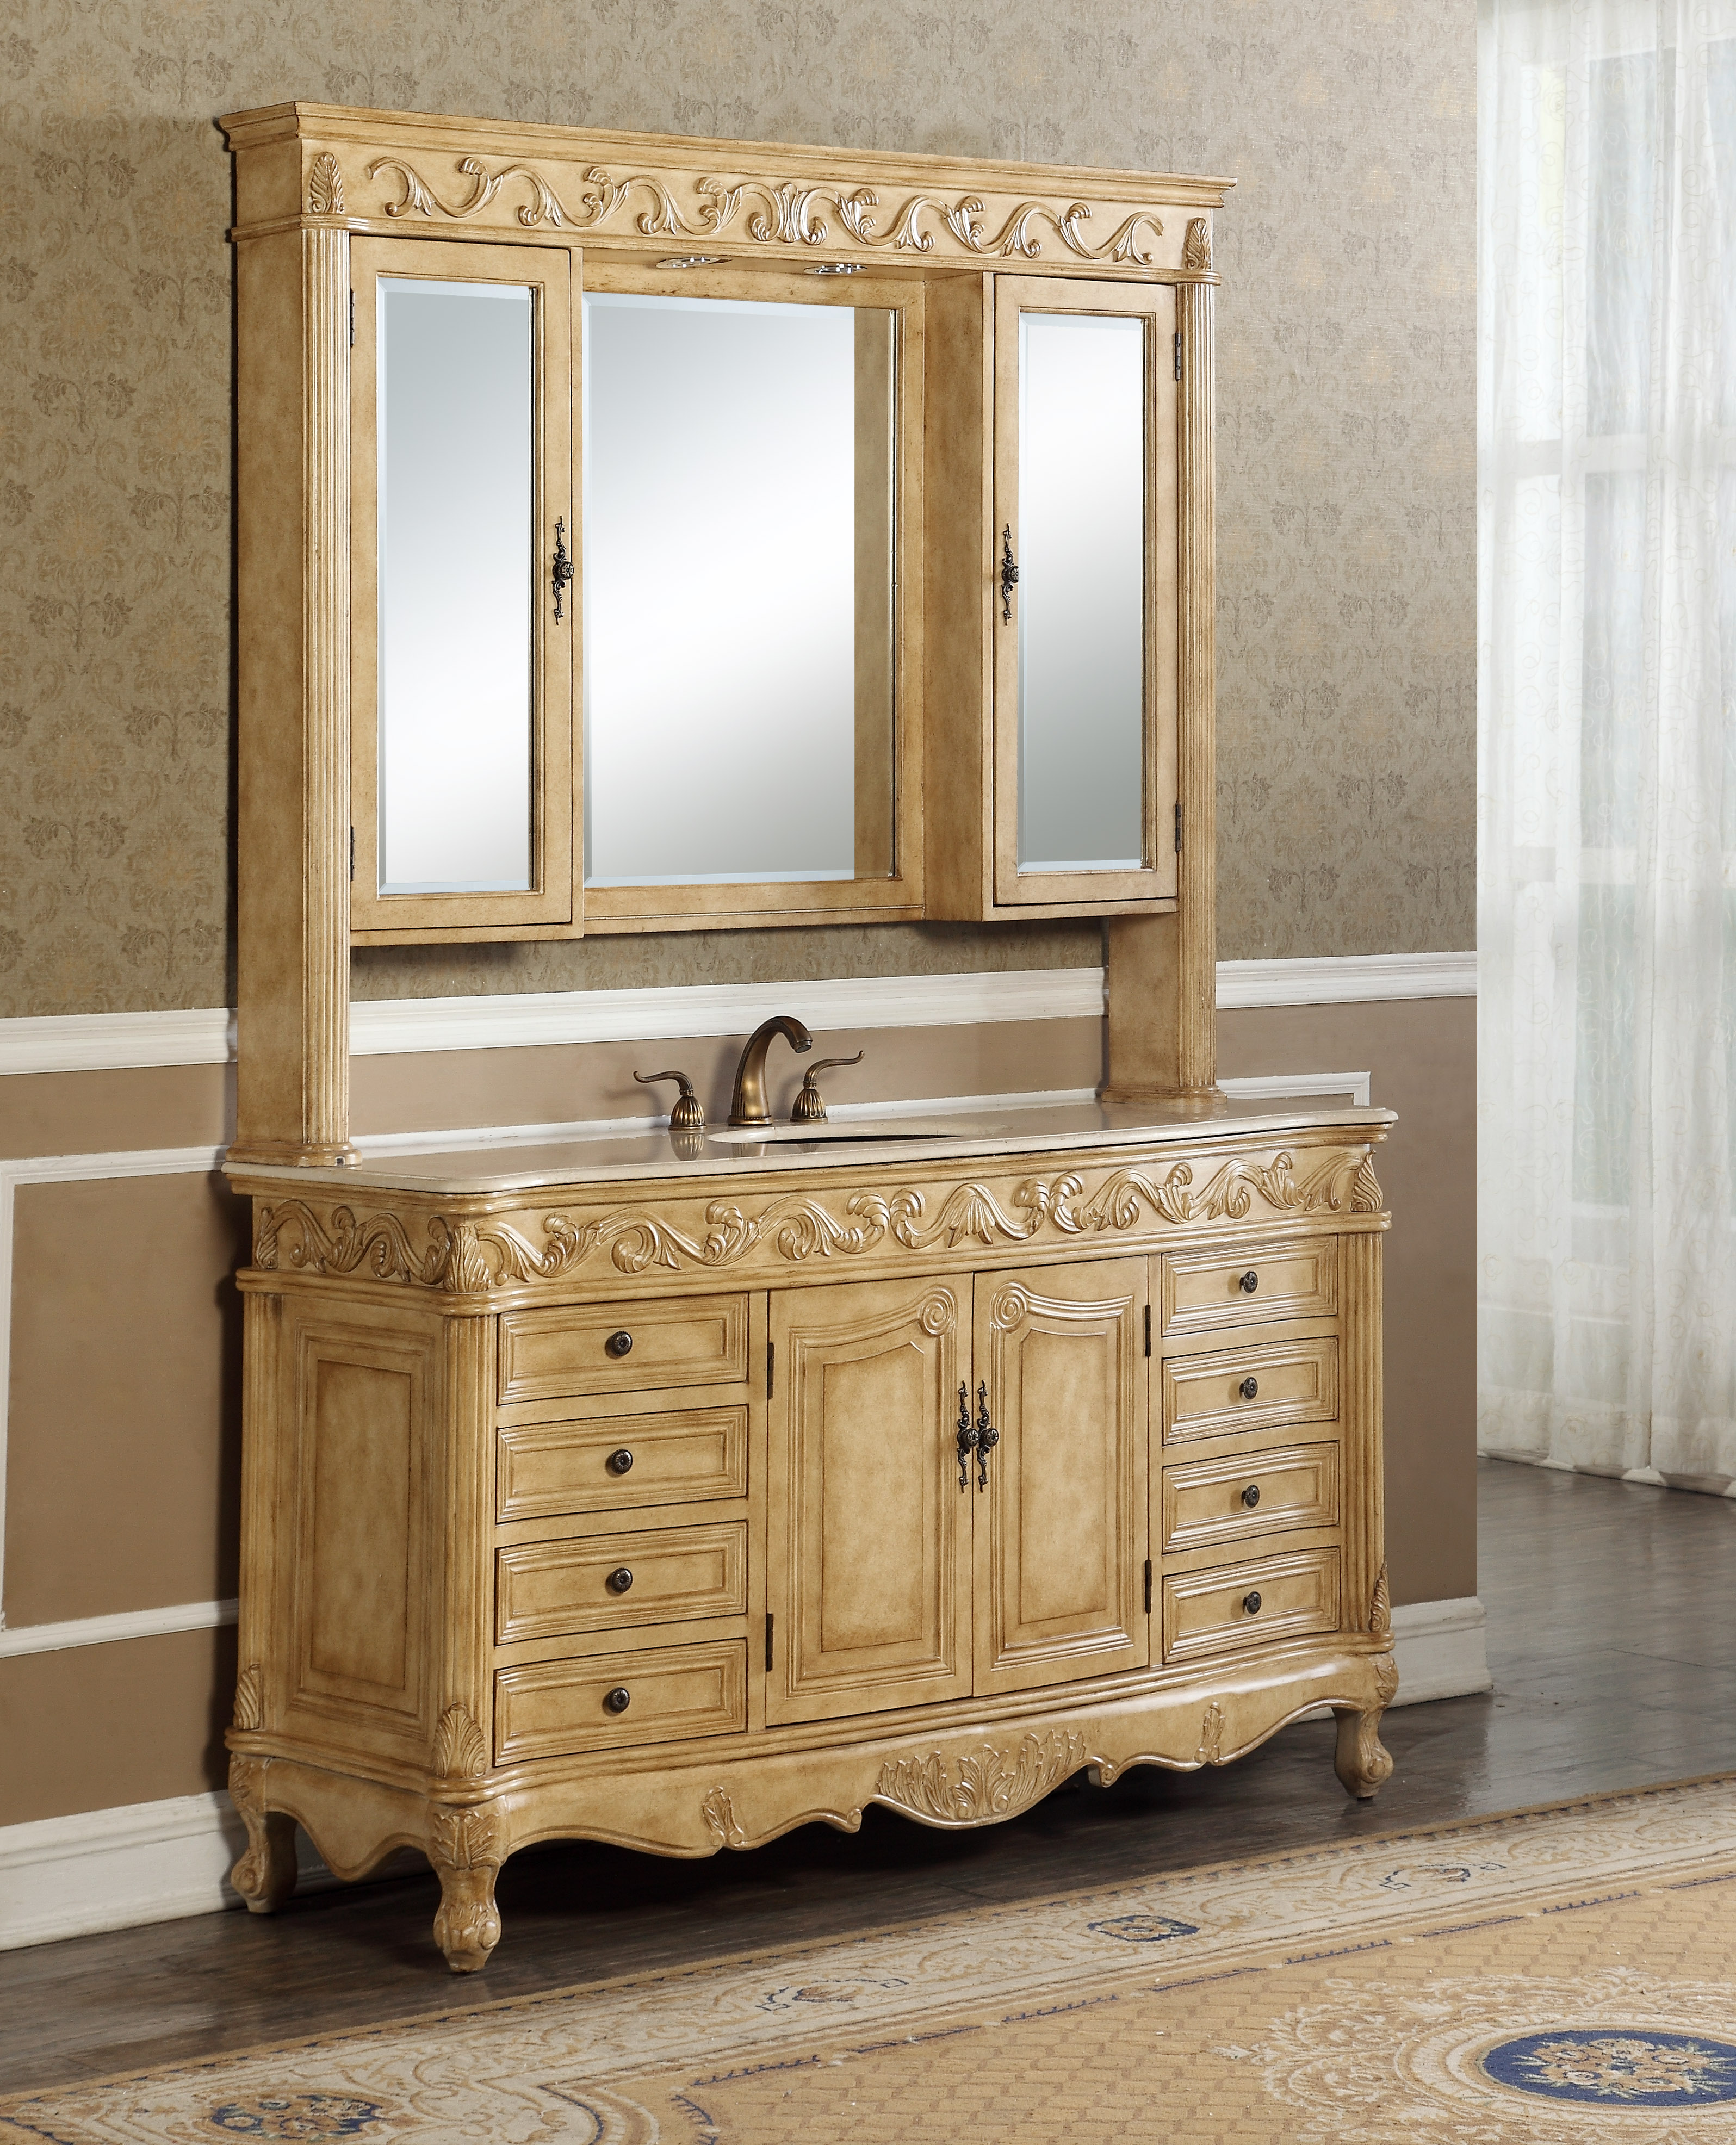 60" Antique Tan with Matching Medicine Cabinet, Imperial White Marble Top